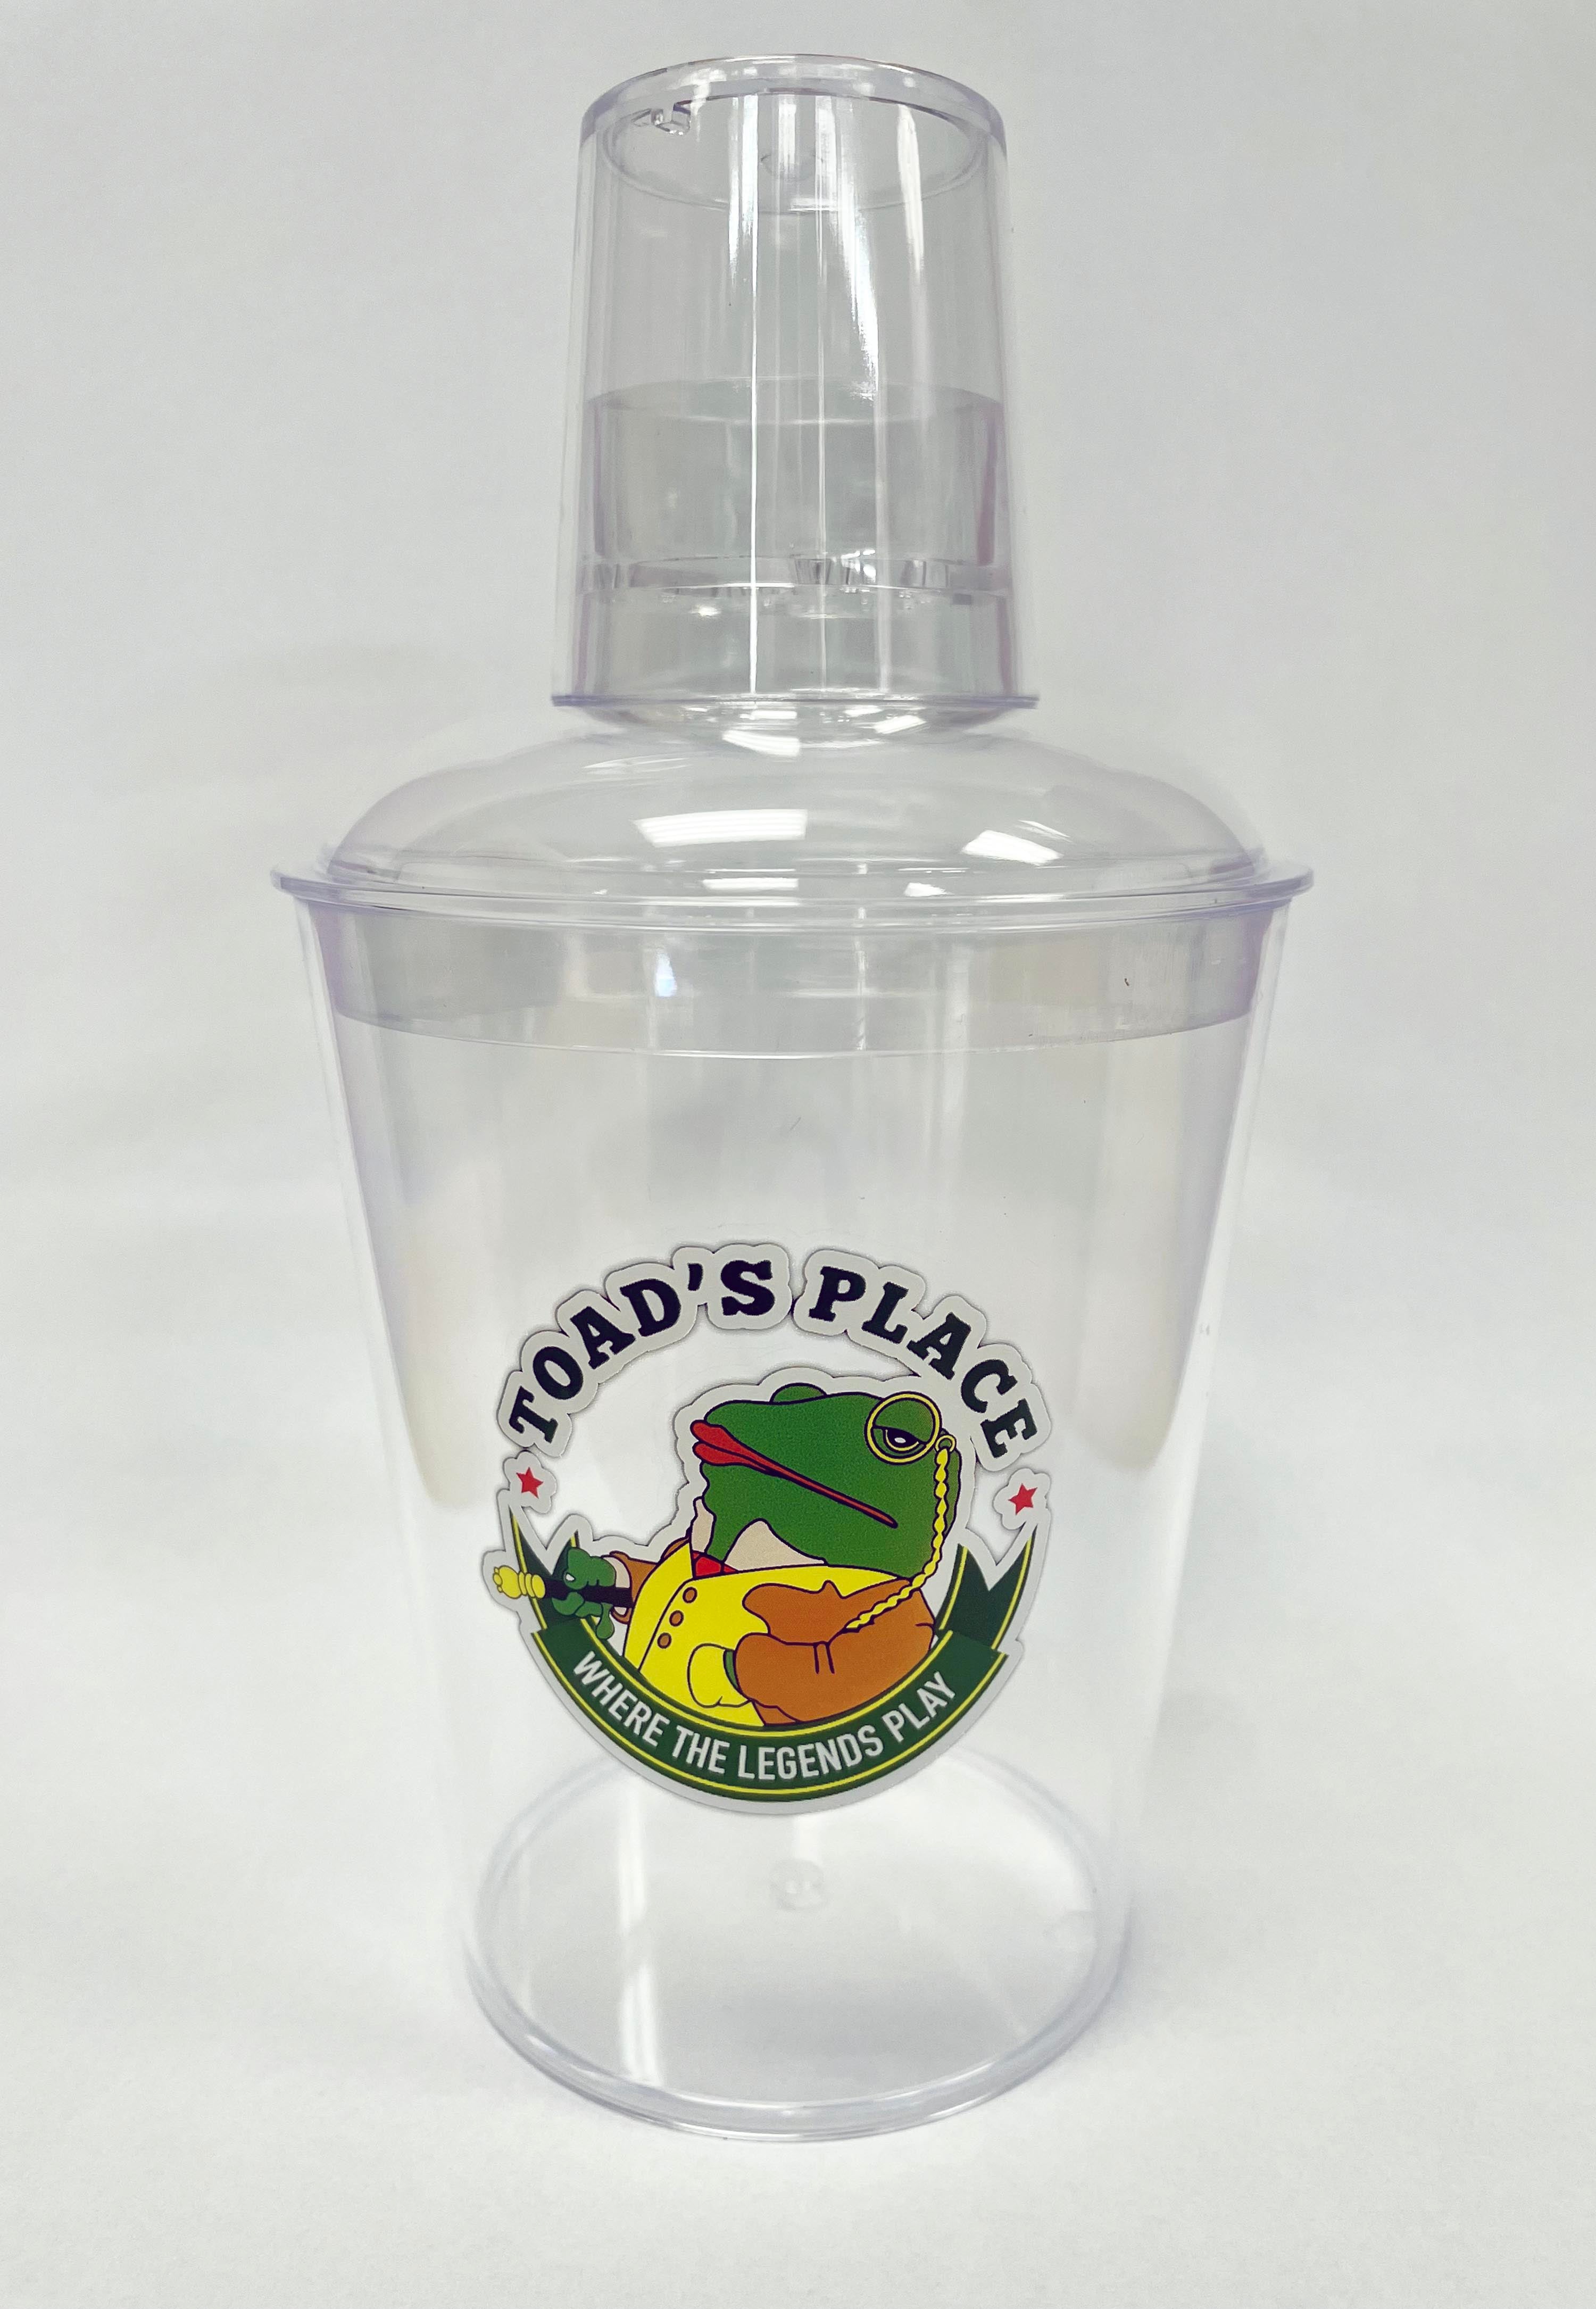 Toad's Place Shaker